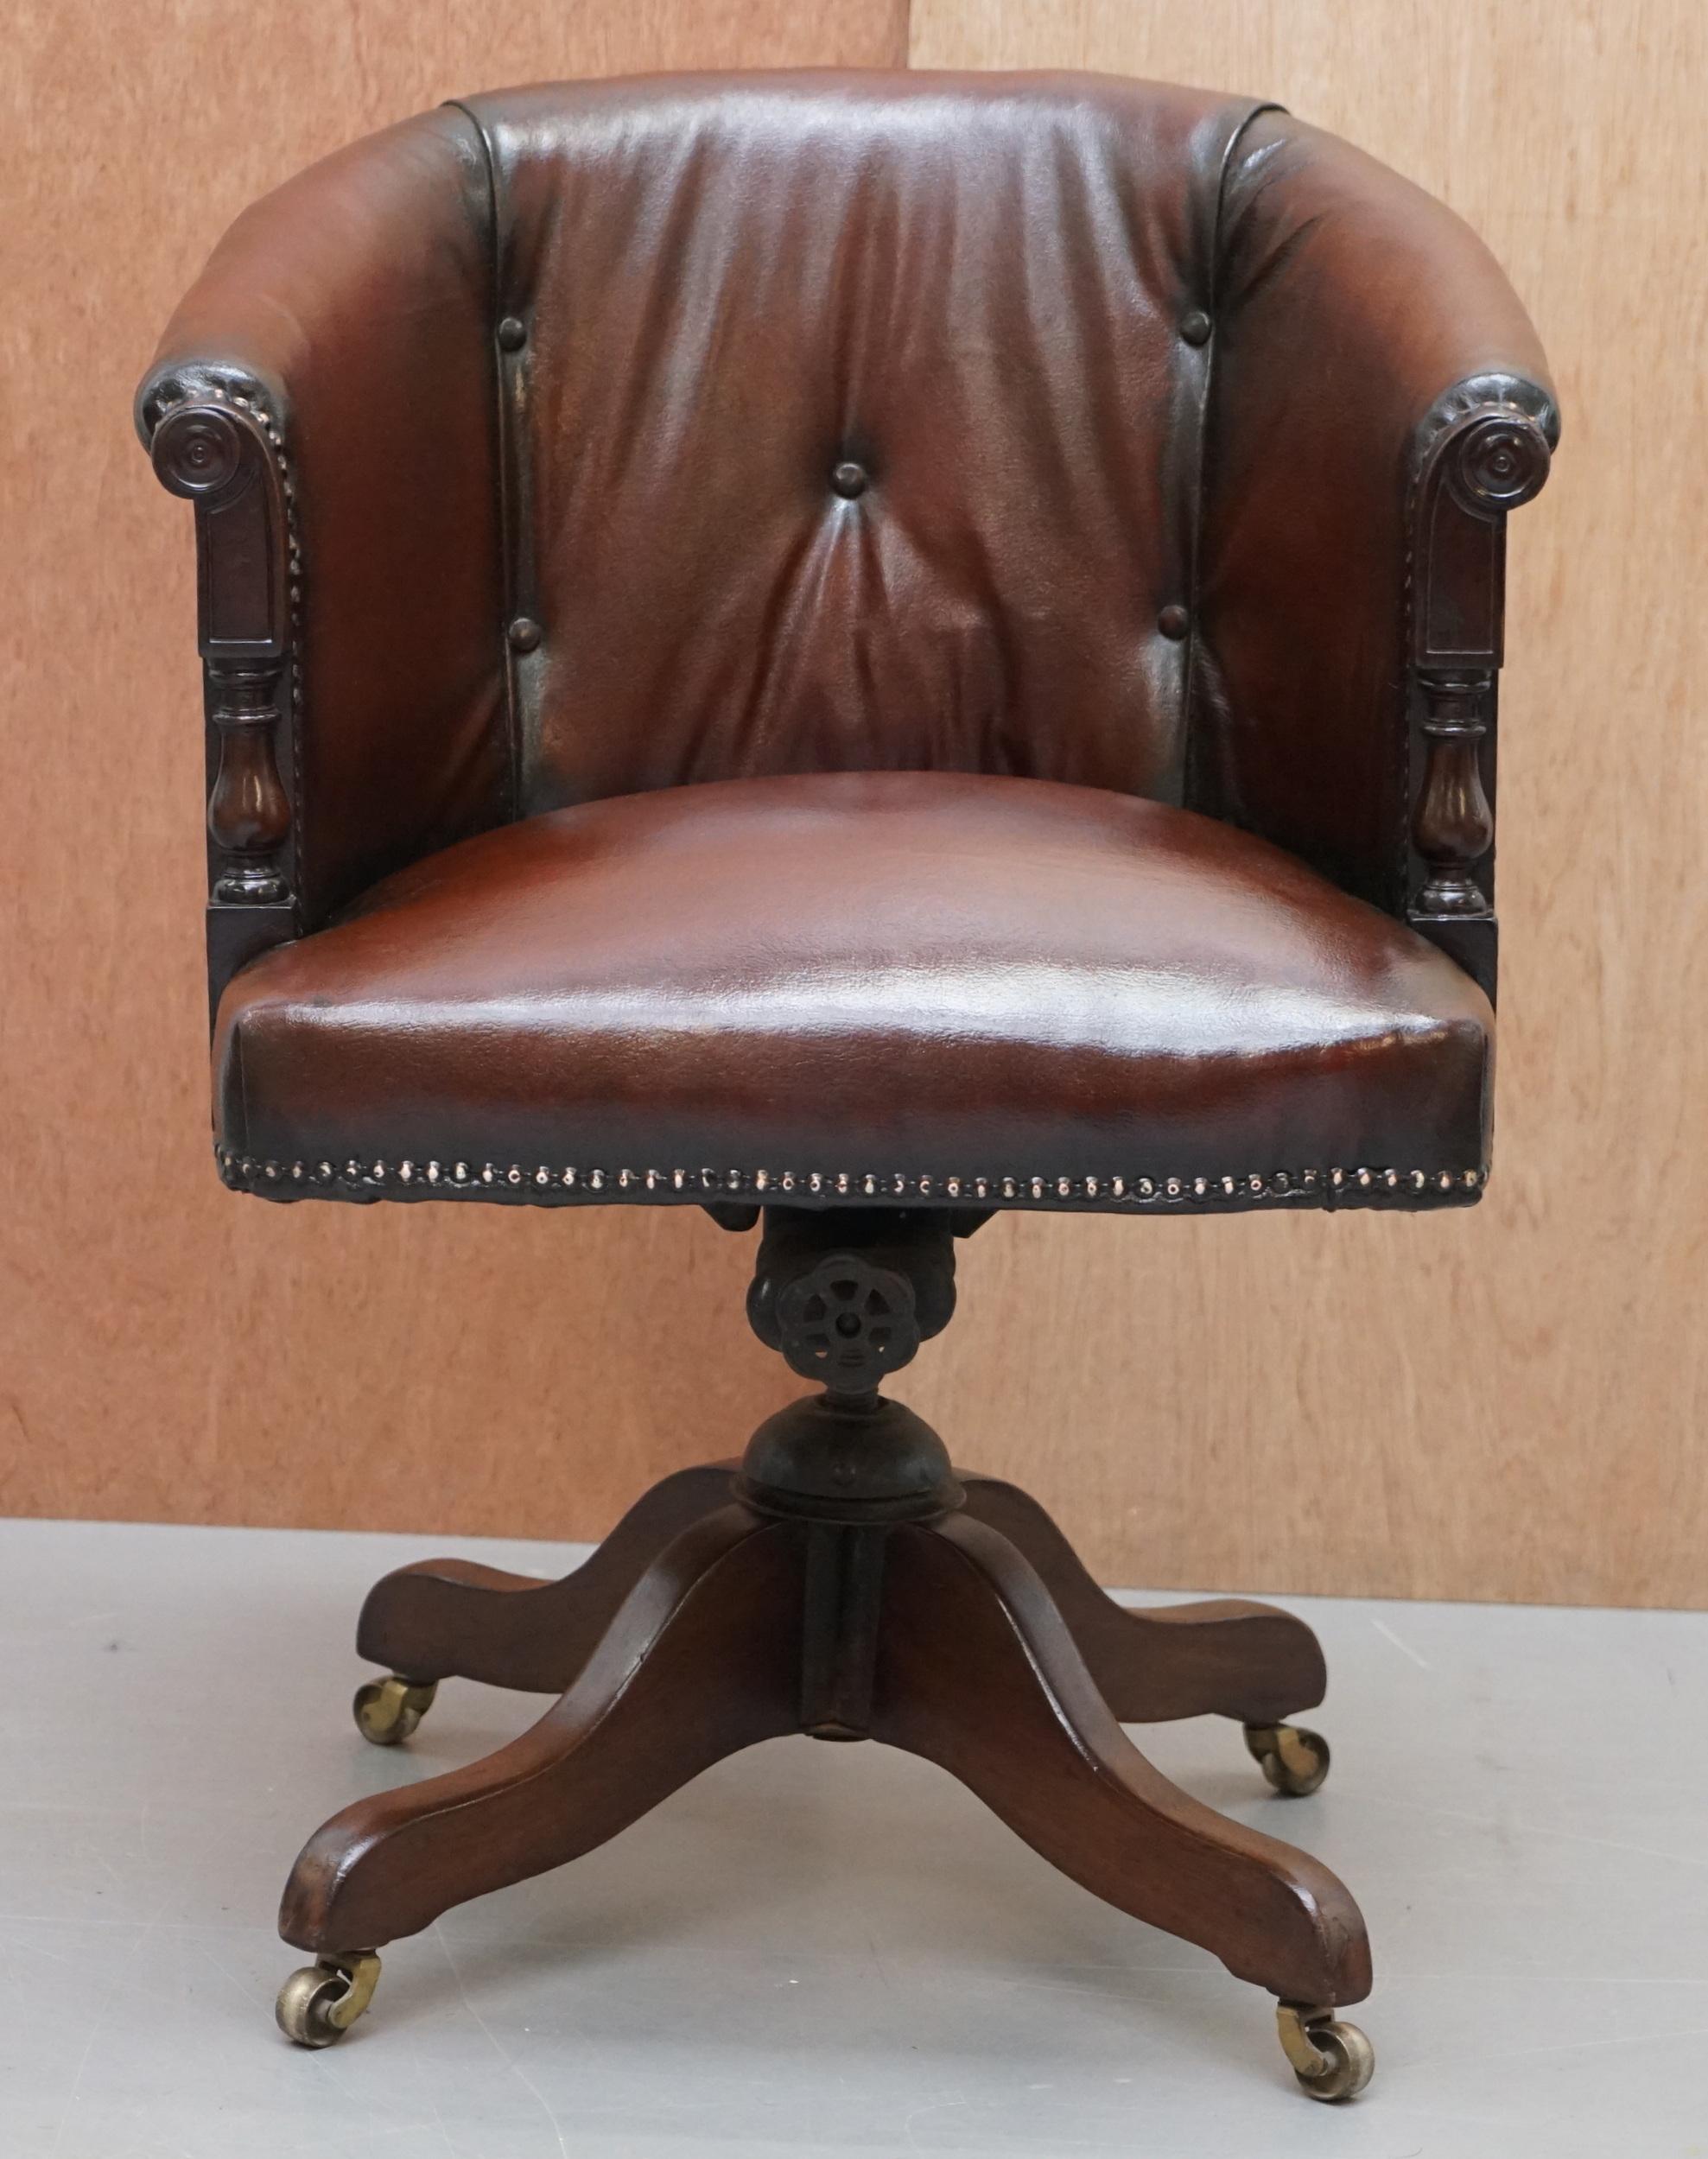 We are delighted to this fully restored circa 1860 Barrell back Chesterfield hand dyed brown leather office chair

This chair is really quite exquisite, it’s one of the earliest types of swivel chairs I have ever seen, the frame is solid oak, the